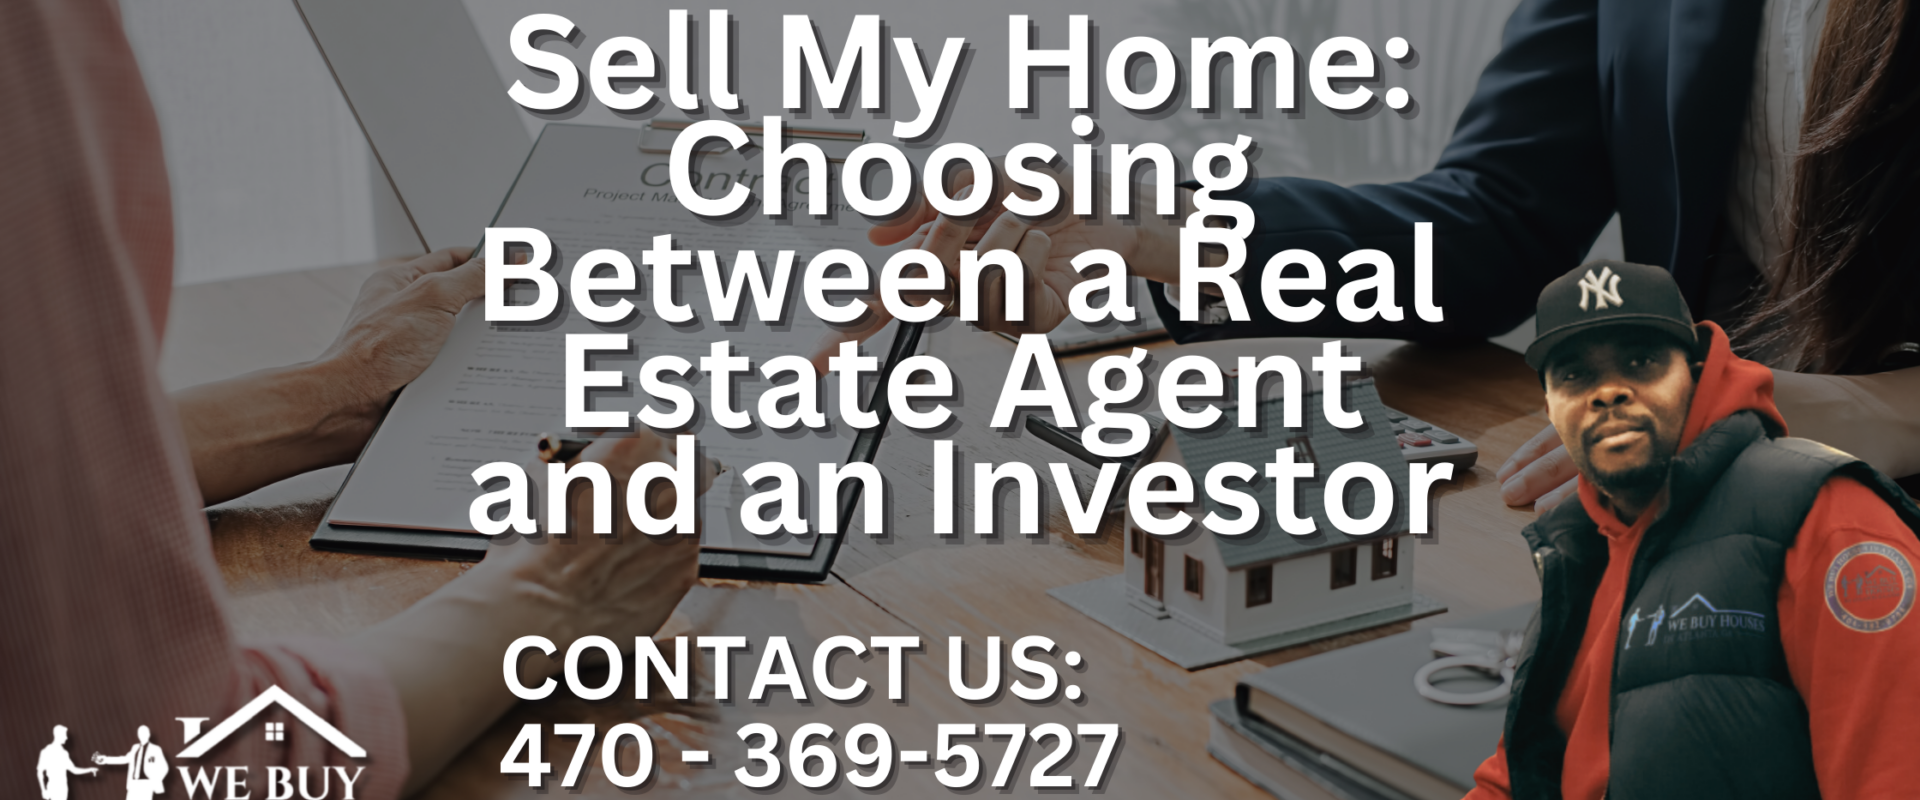 Sell My Home: Choosing Between a Real Estate Agent and an Investor